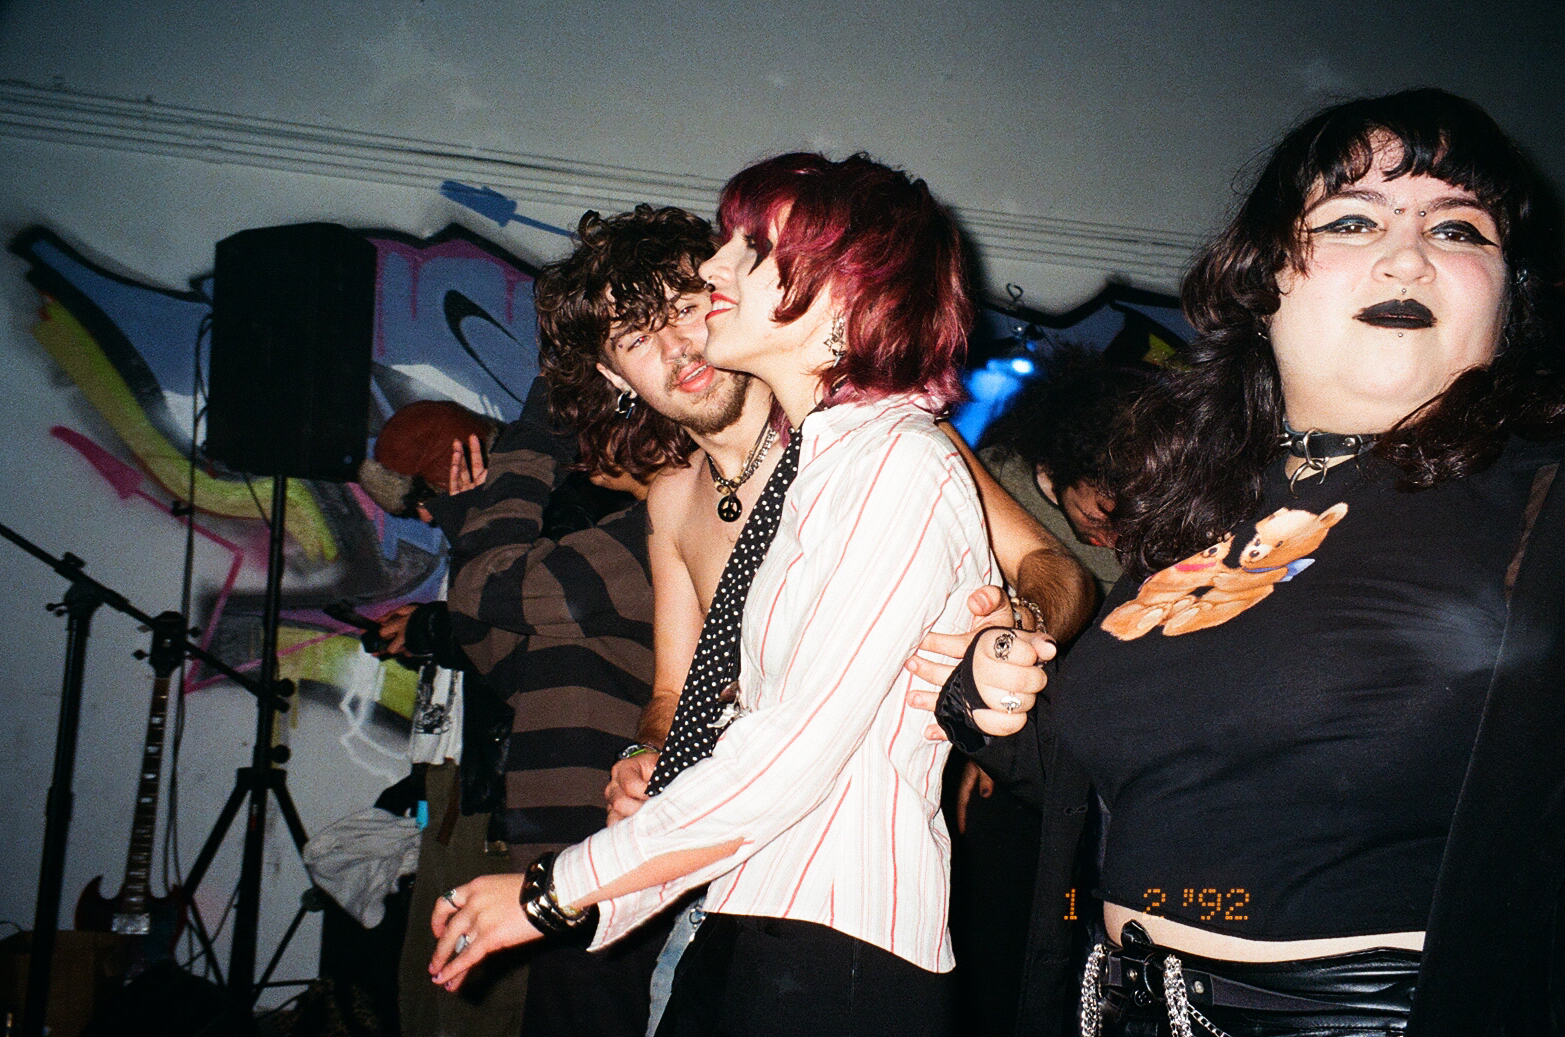 In the Shadow of the Superclub: An Interview with Miami Punk Photographer Sal Rispoli